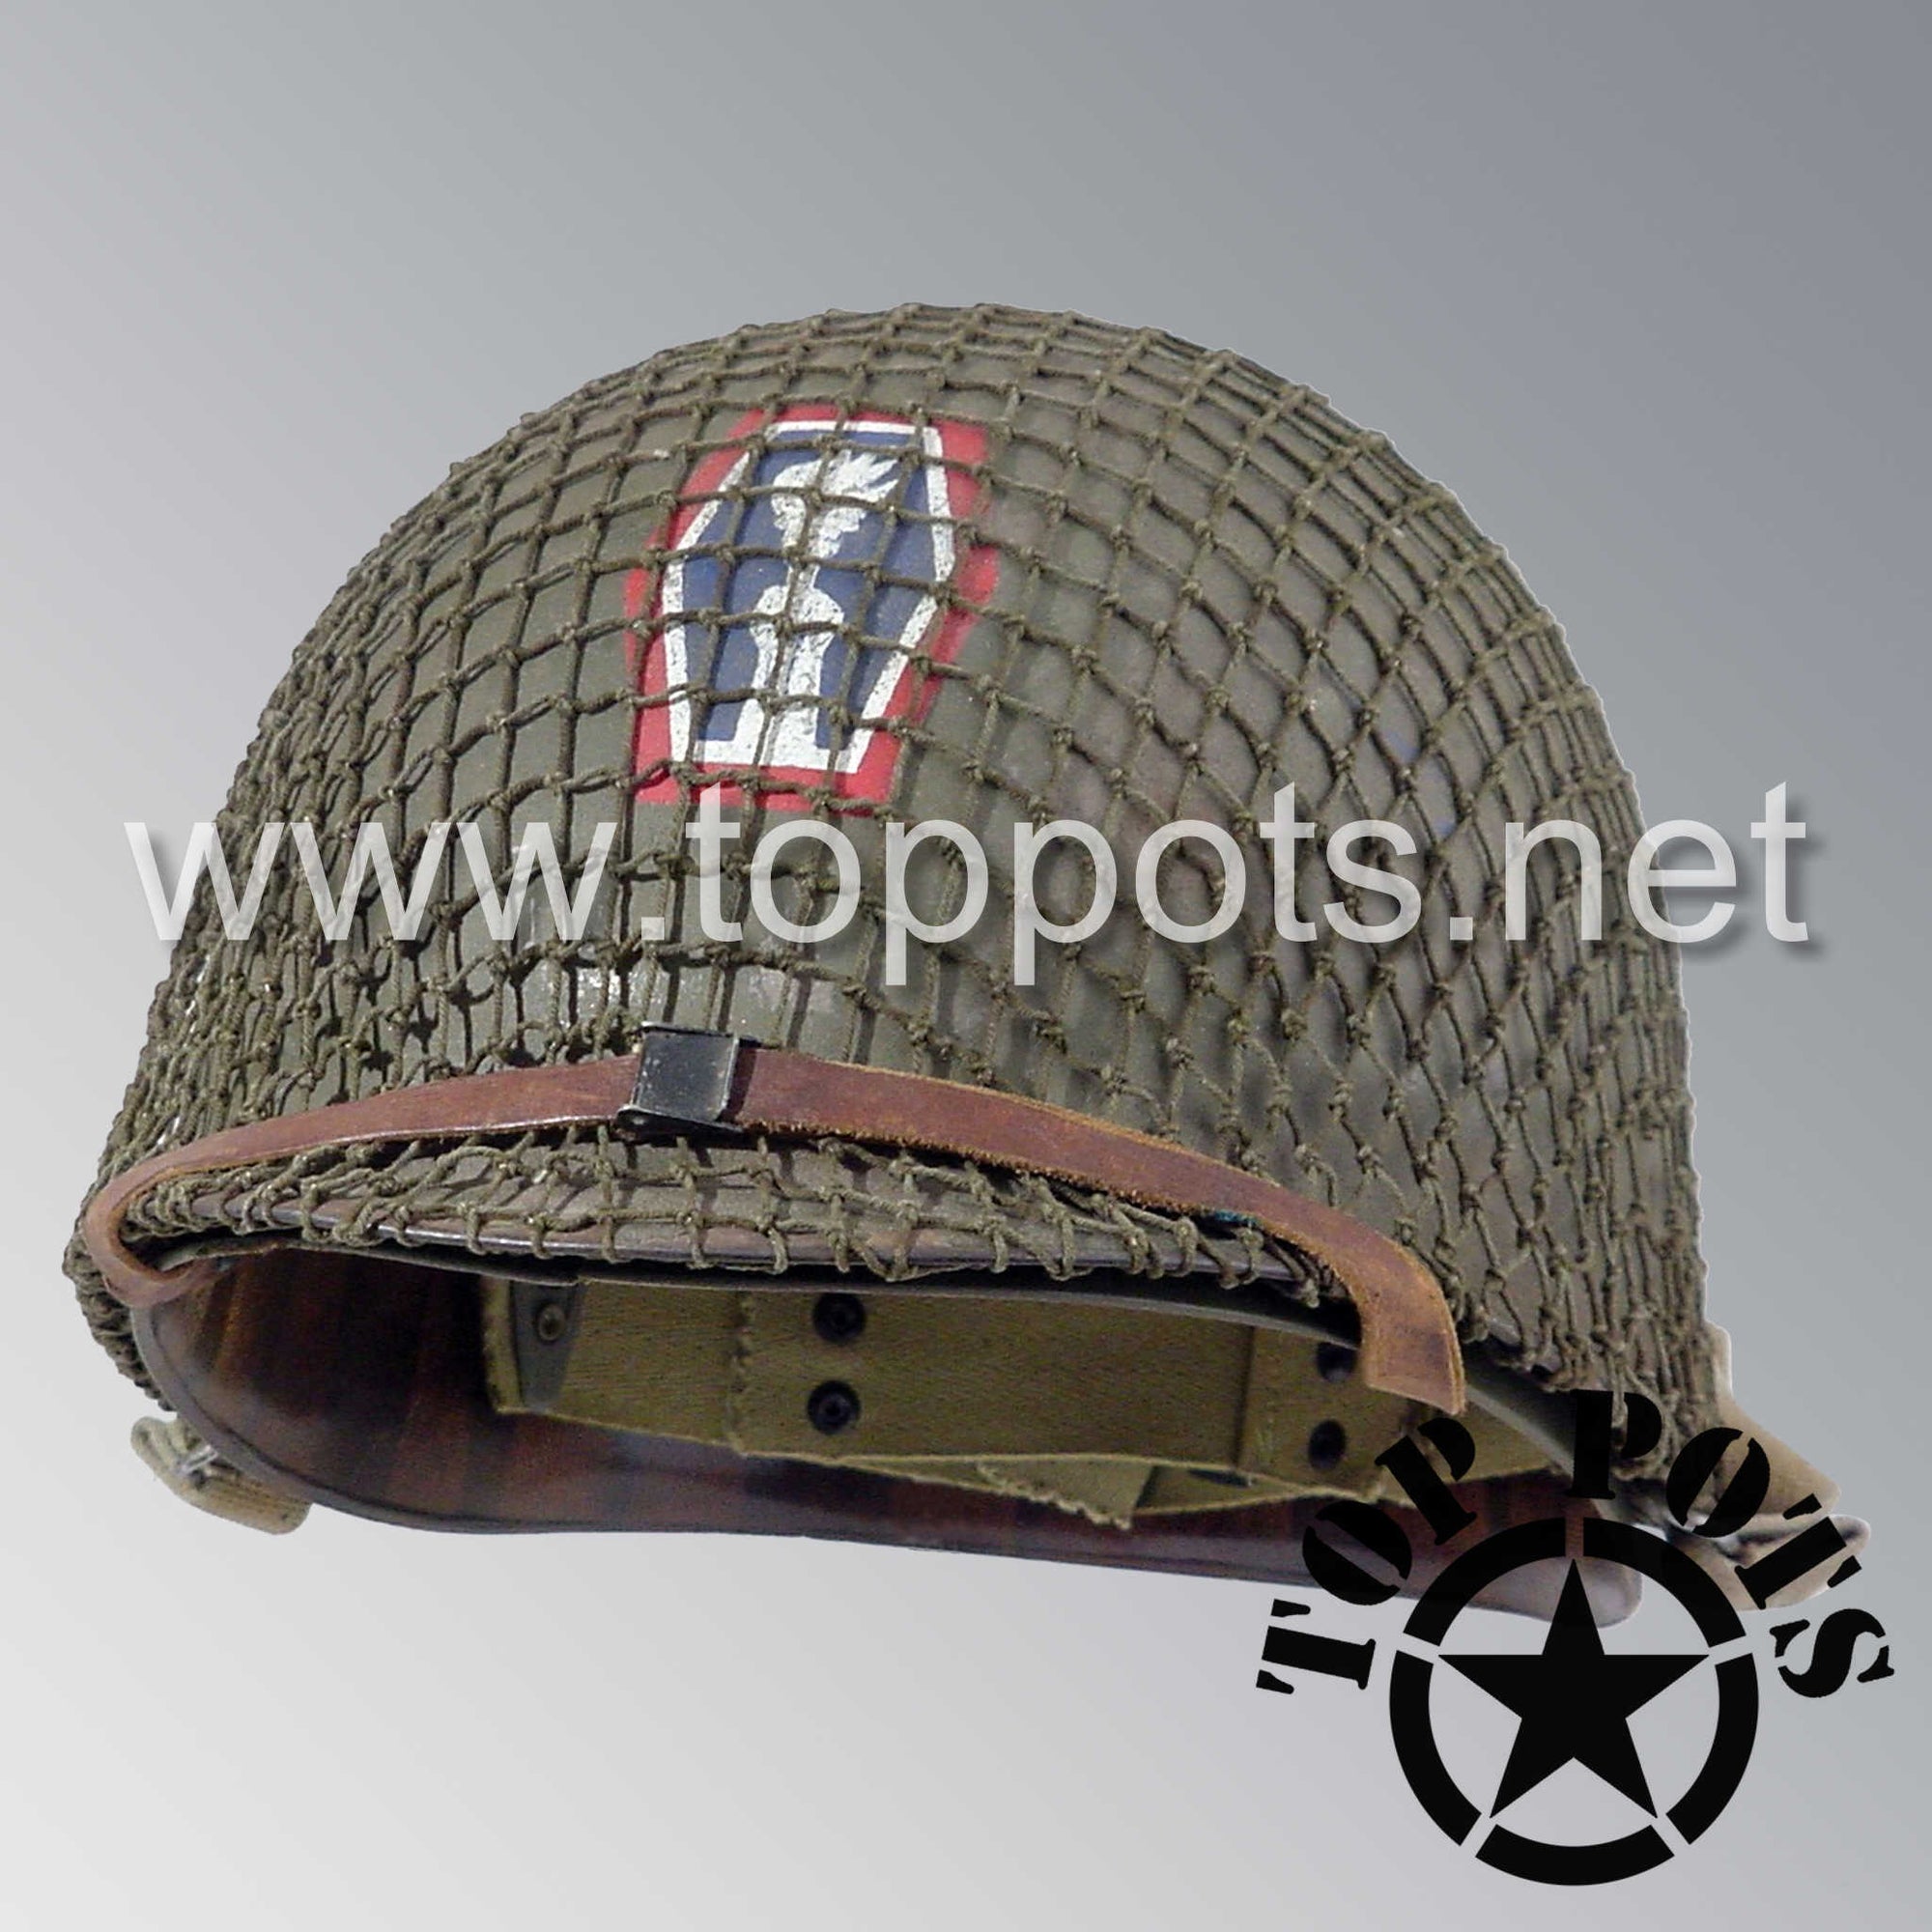 WWII US Army Aged Original M1 Infantry Helmet Swivel Bale Shell and Liner with 442nd Infantry Division Emblem with Net